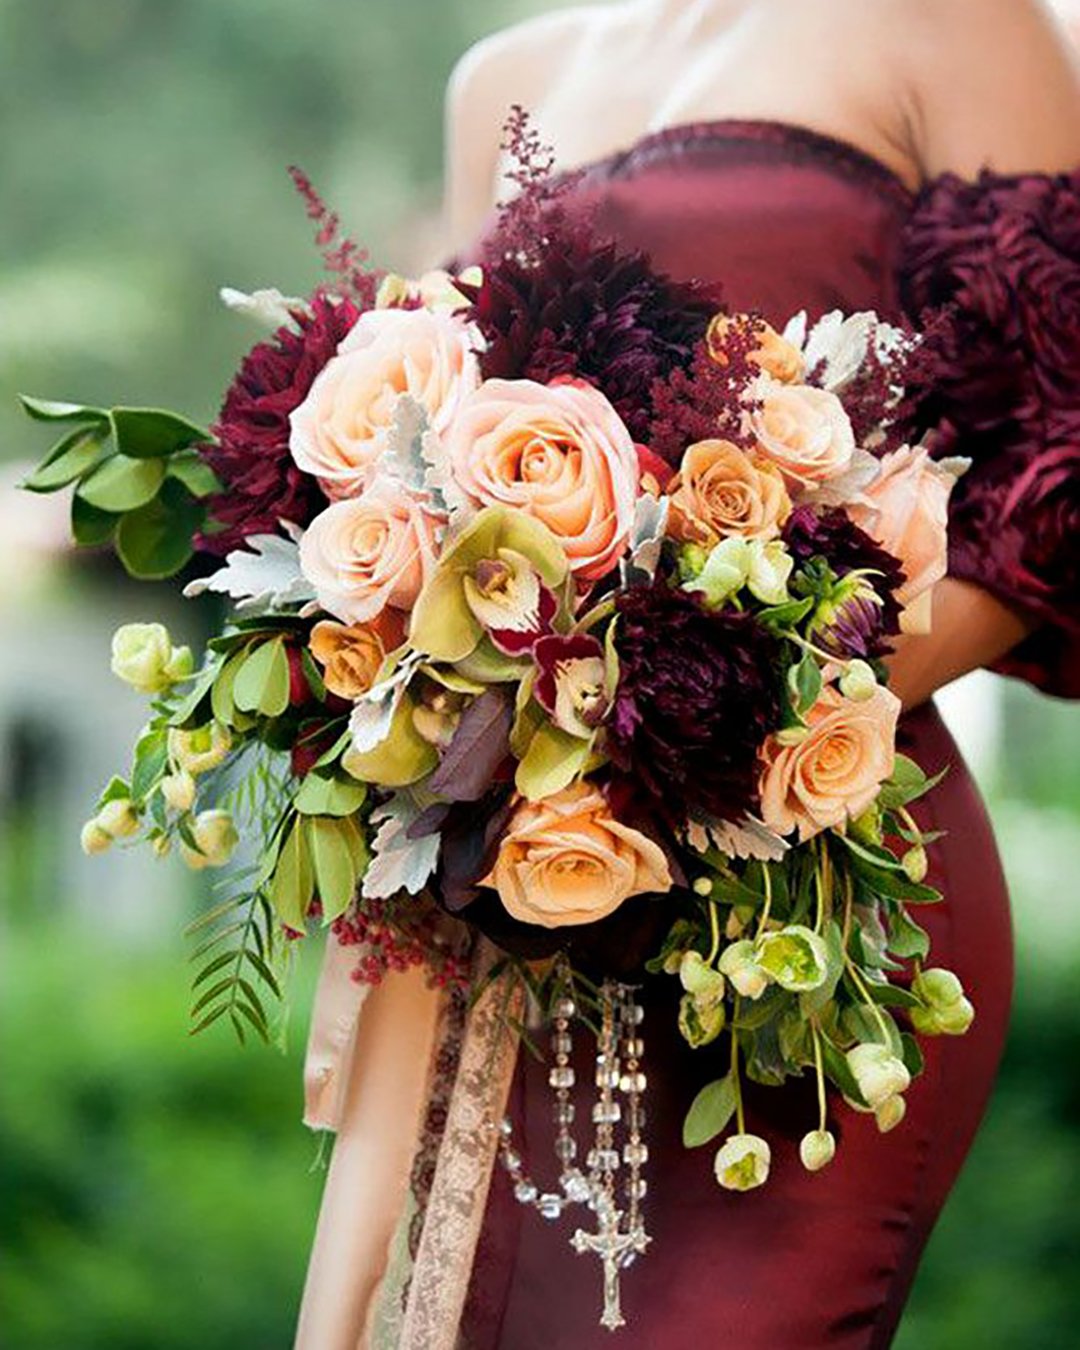 wedding bouquet ideas inspiration with rose gold roses and marsala dahlias and greenery nancy ramos photography 3